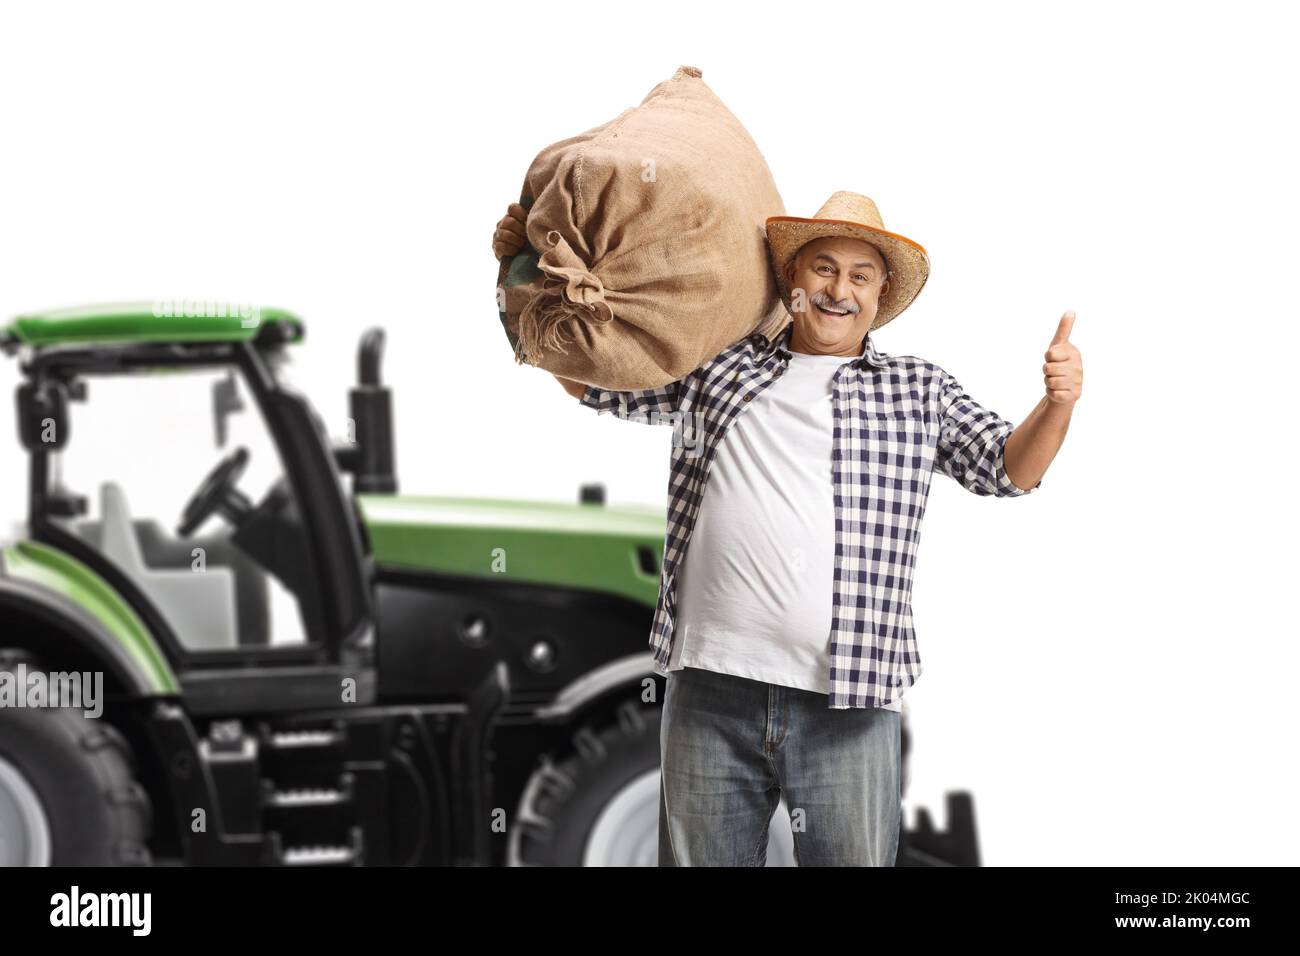 Mature farmer with a sack gesturing thumbs up in front of a tractor isolated on white background Stock Photo